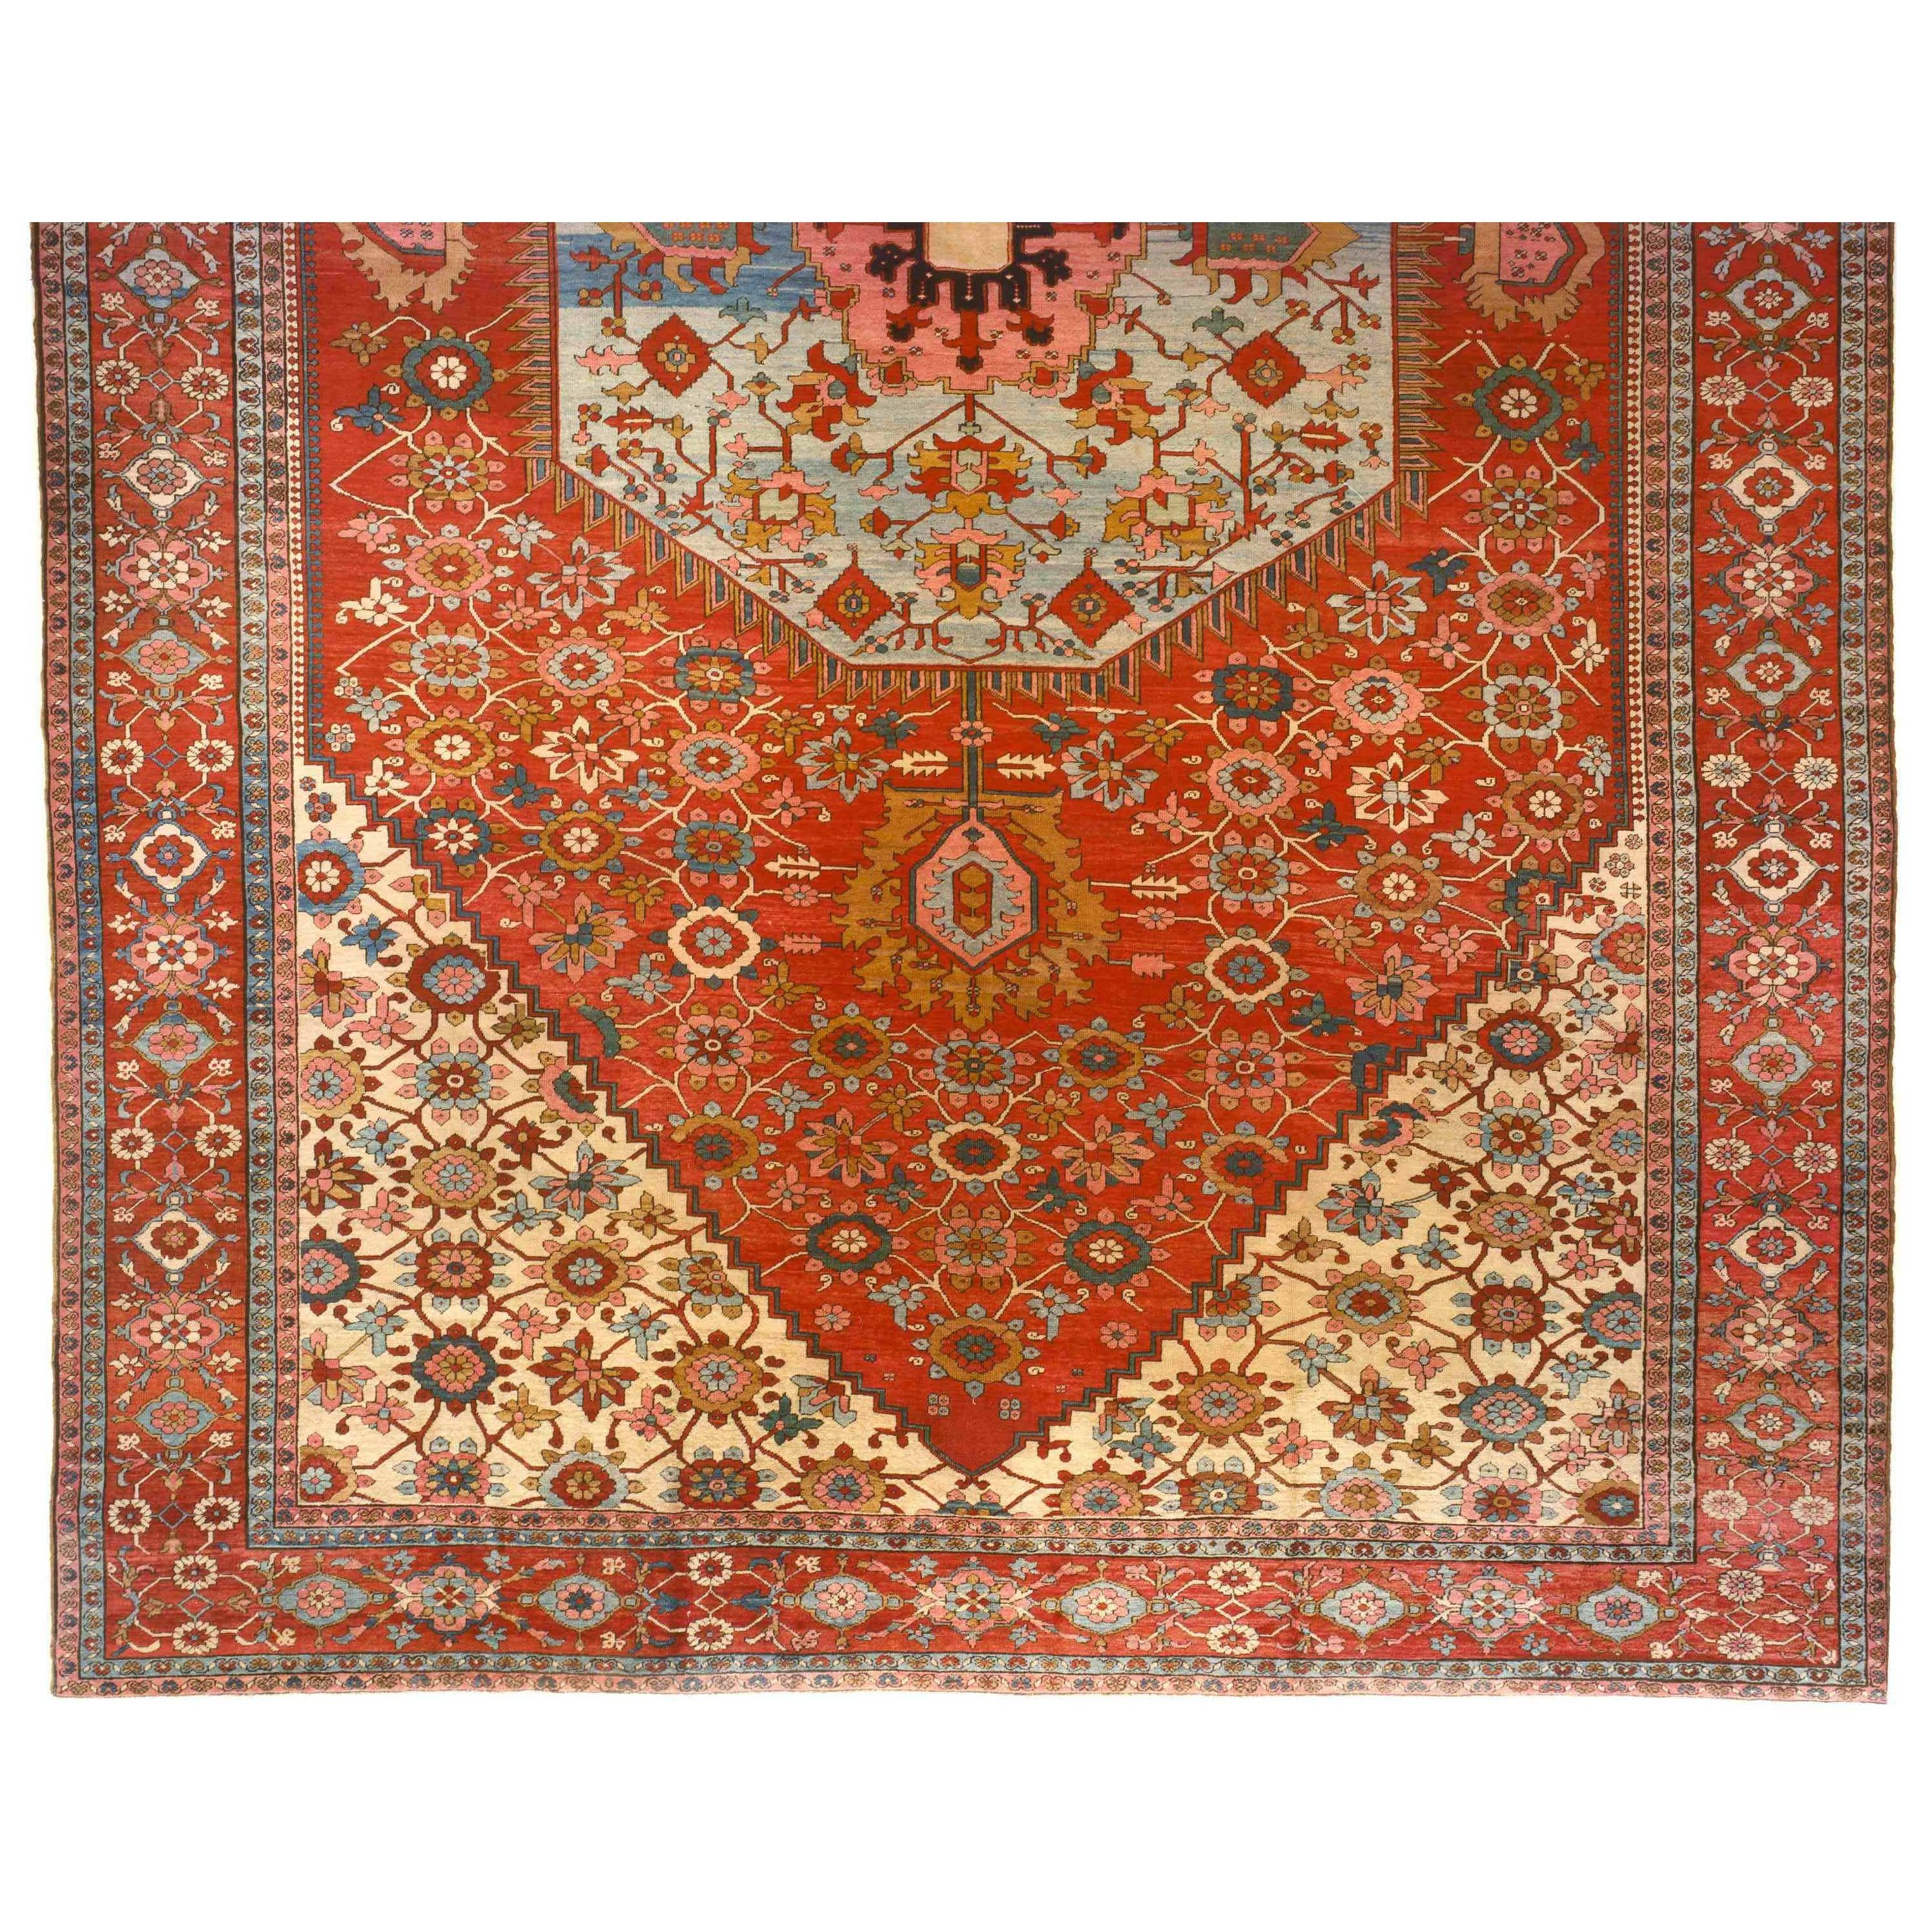 An antique Persian Serapi oriental carpet, size: 25 feet H x 16 feet W, circa 1880. This unique hand-knotted wool carpet is characterized by its soft blue central medallion, which sits amidst a sea of soft red, and is anchored by ivory corner